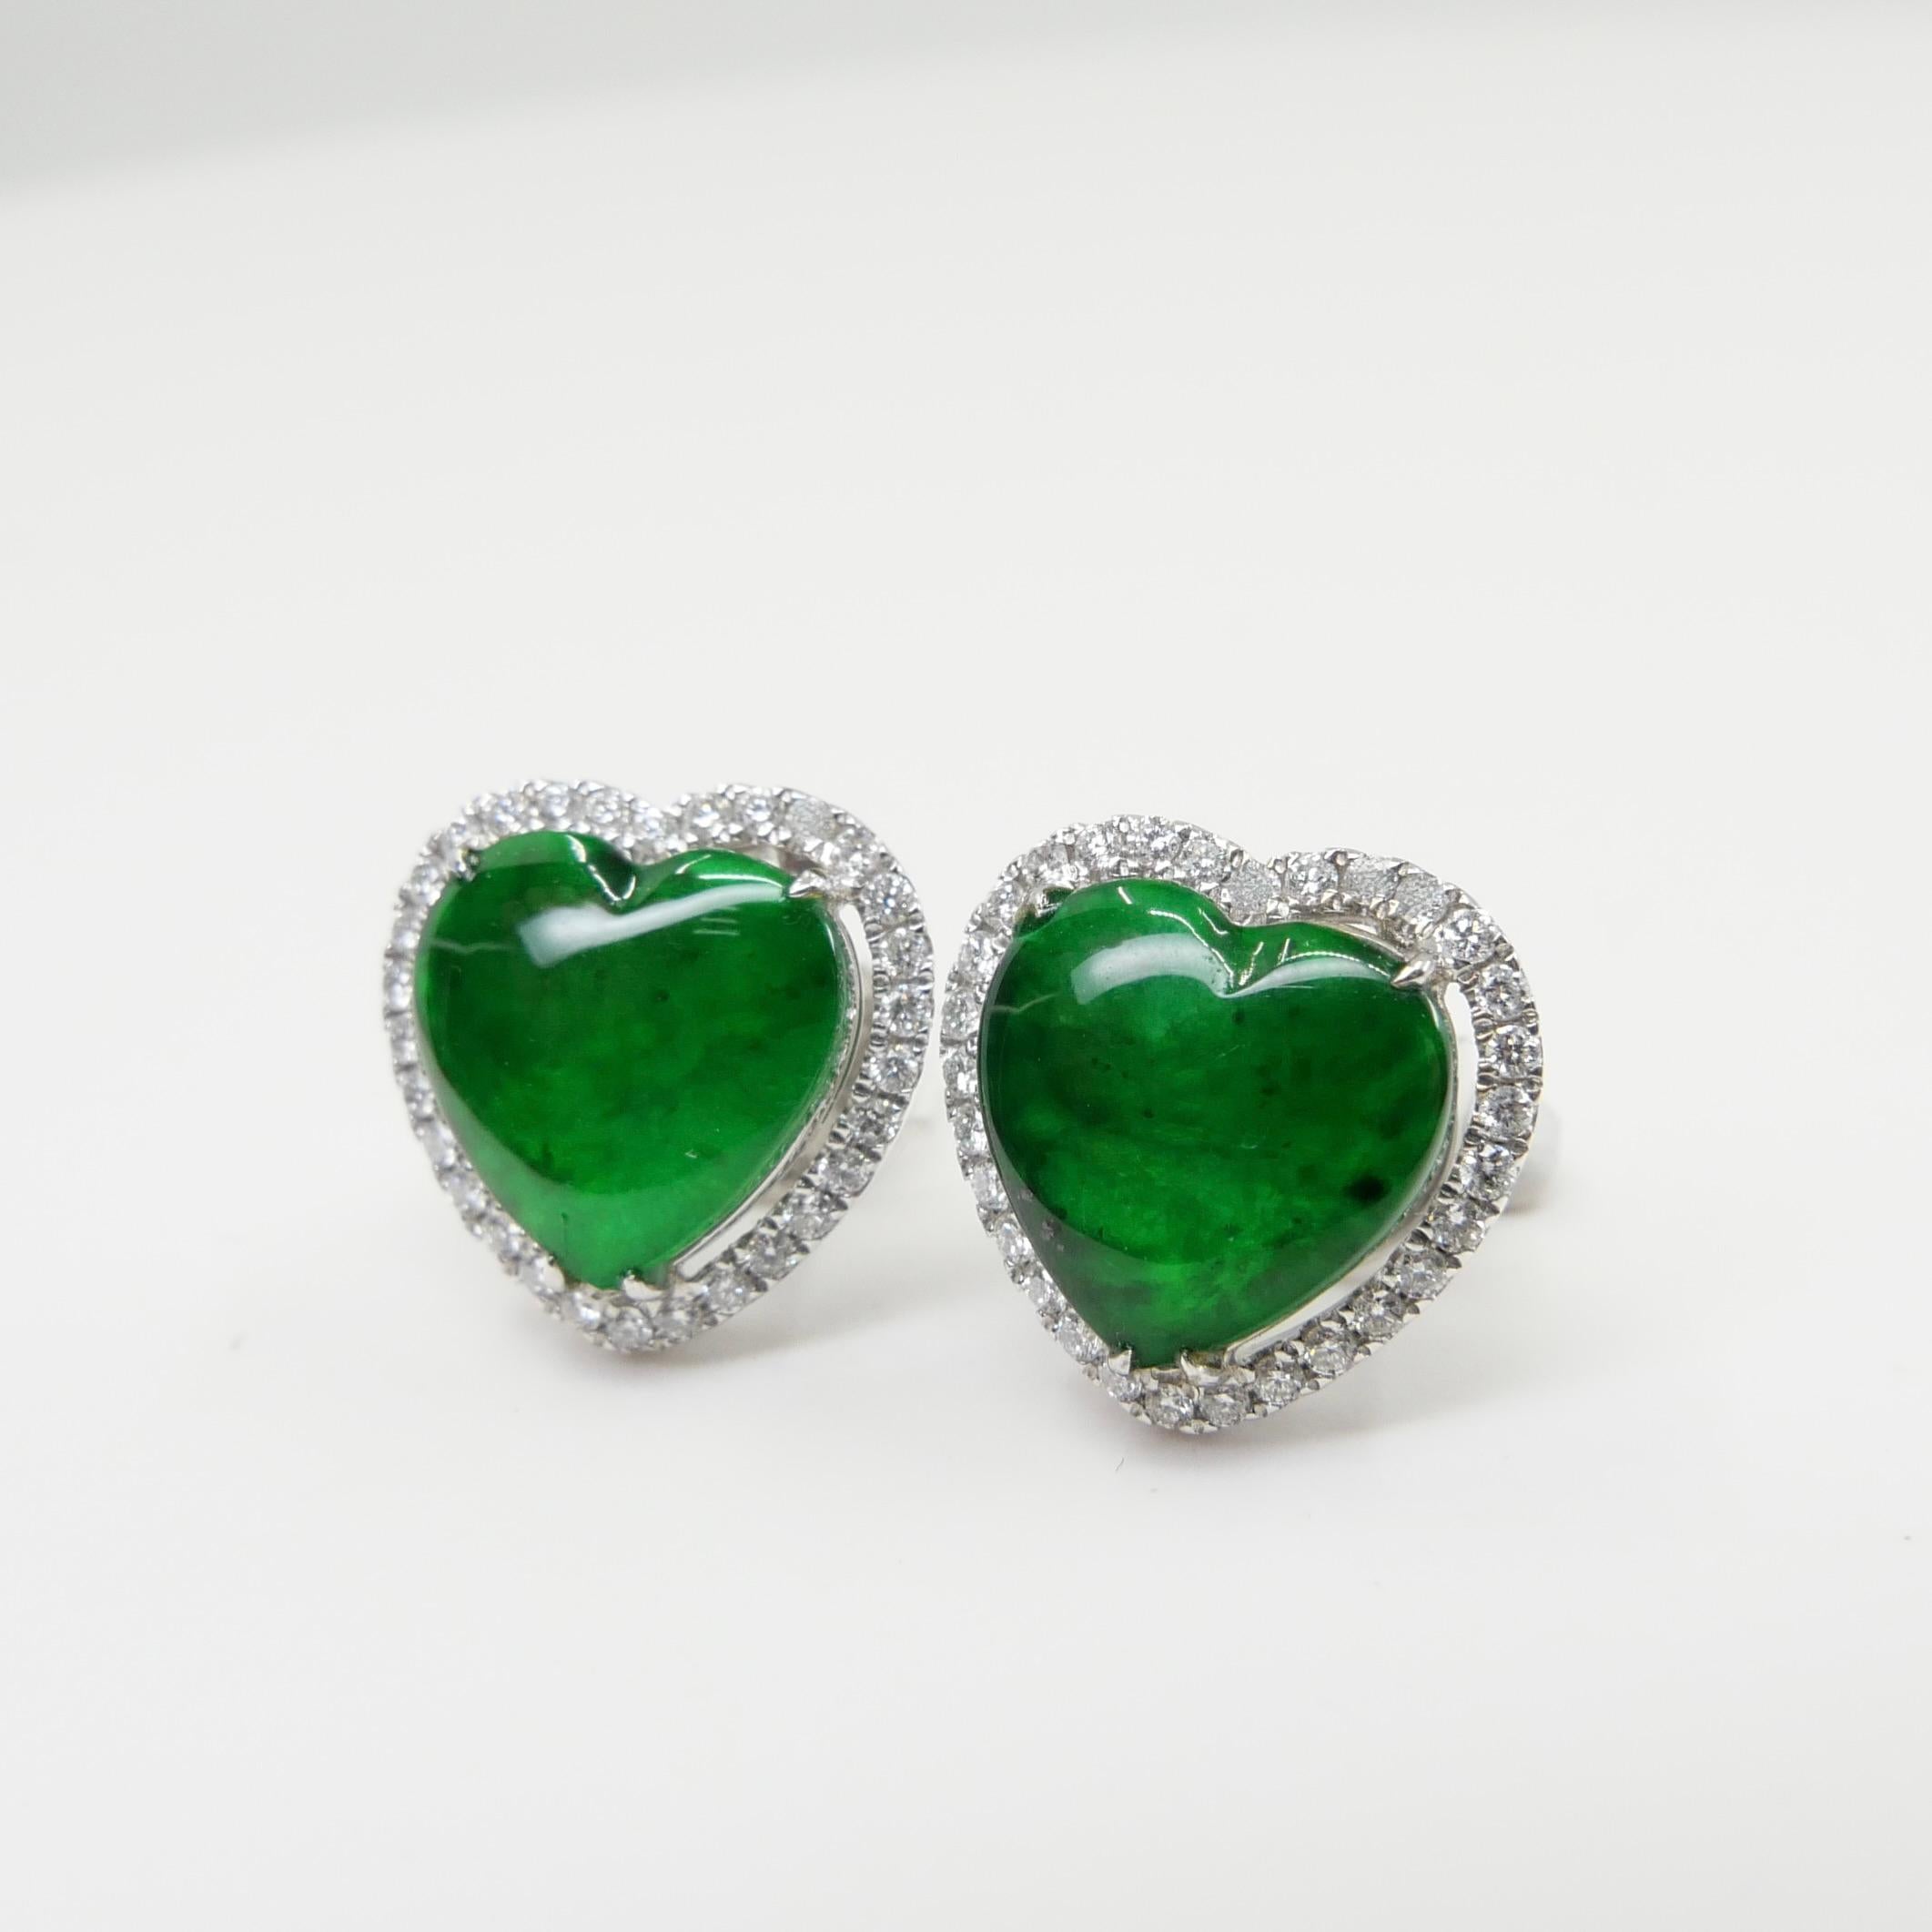 Certified Type A Jadeite and Diamond Earrings Imperial Jade, Spinach Green Color 1